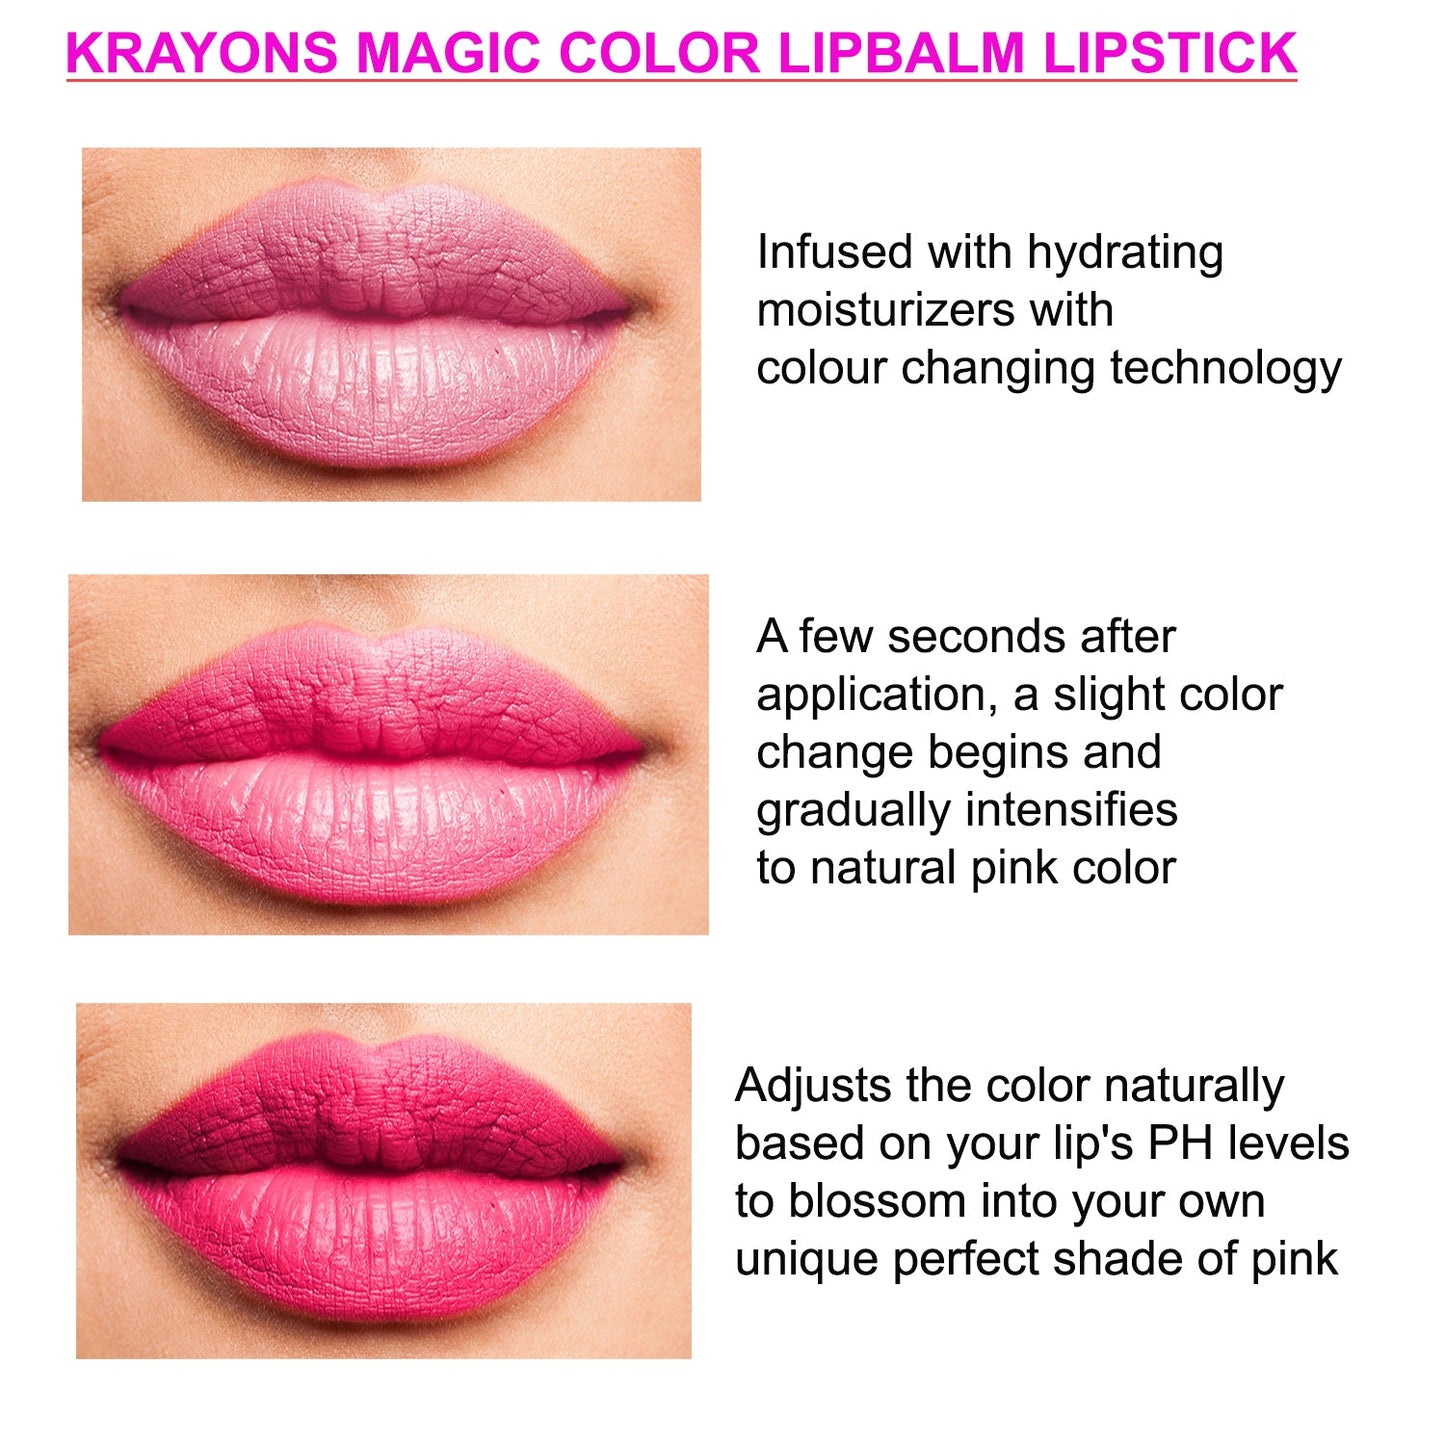 Krayons Desire Magic Color Lipstick, Highly Pigmented, Longlasting, 3.5g (Magic Pink)